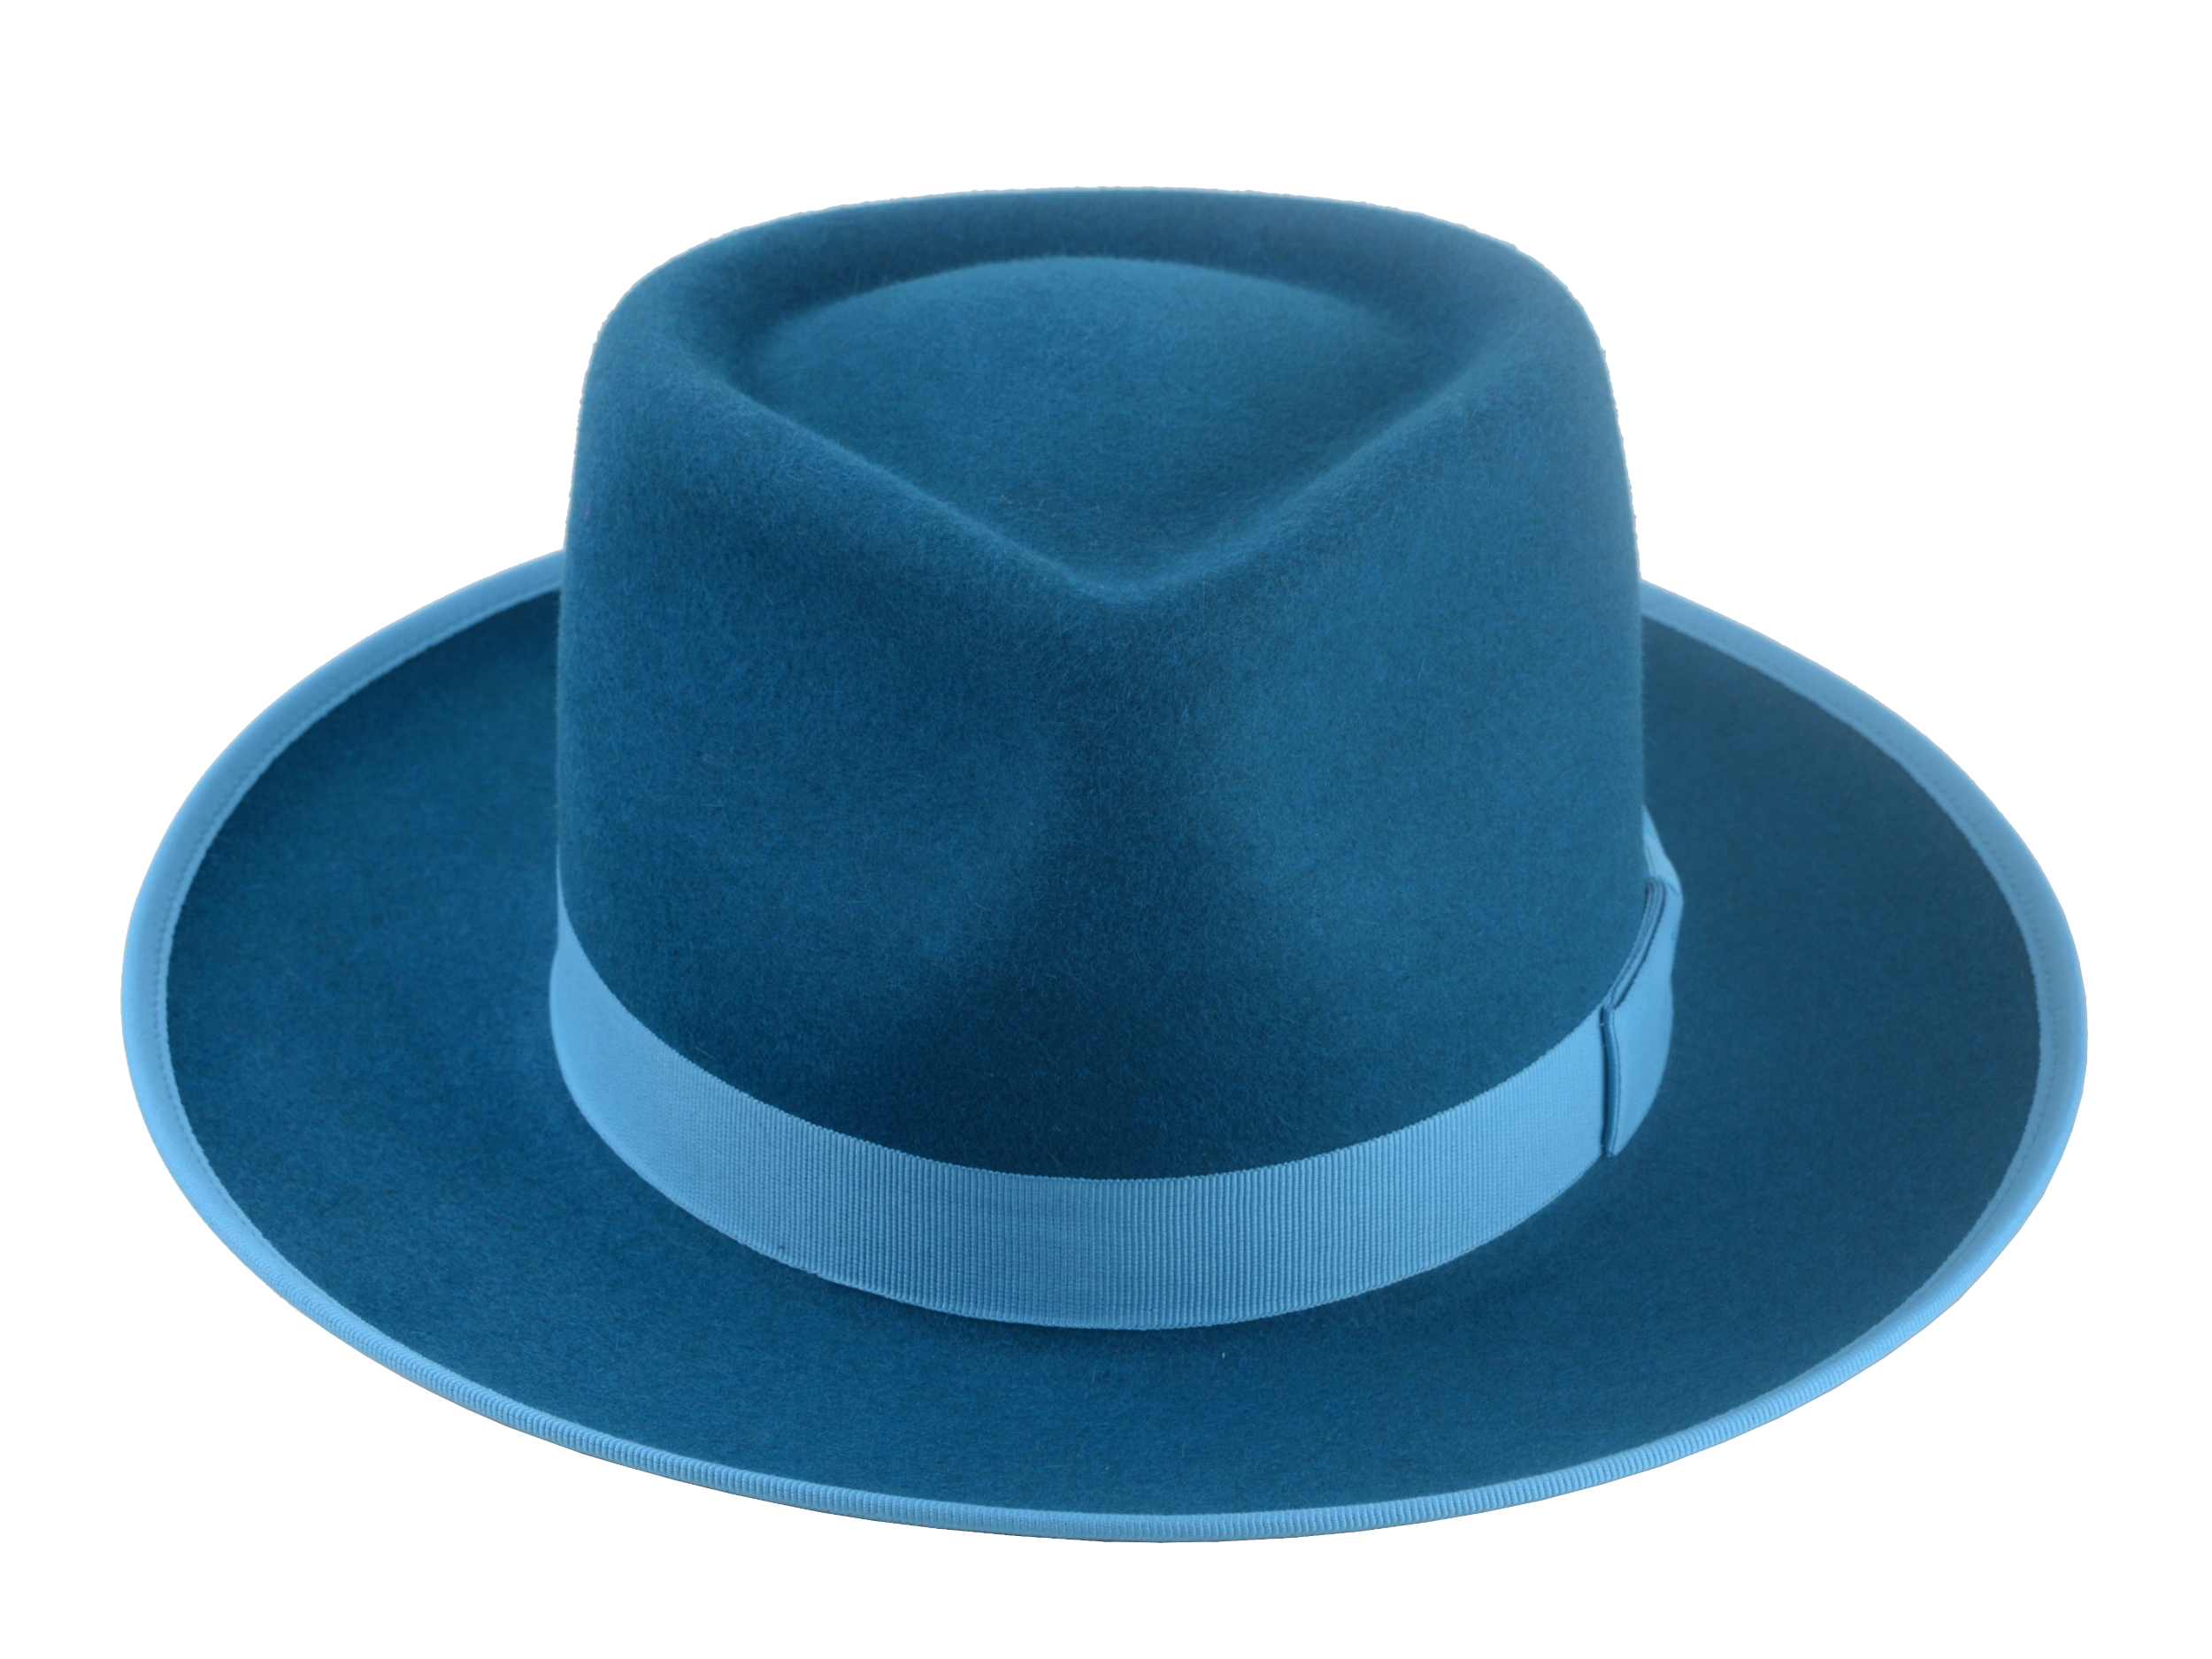 Full view of Equinox fedora hat, showcasing its fashionable silhouette and rich dark teal colo